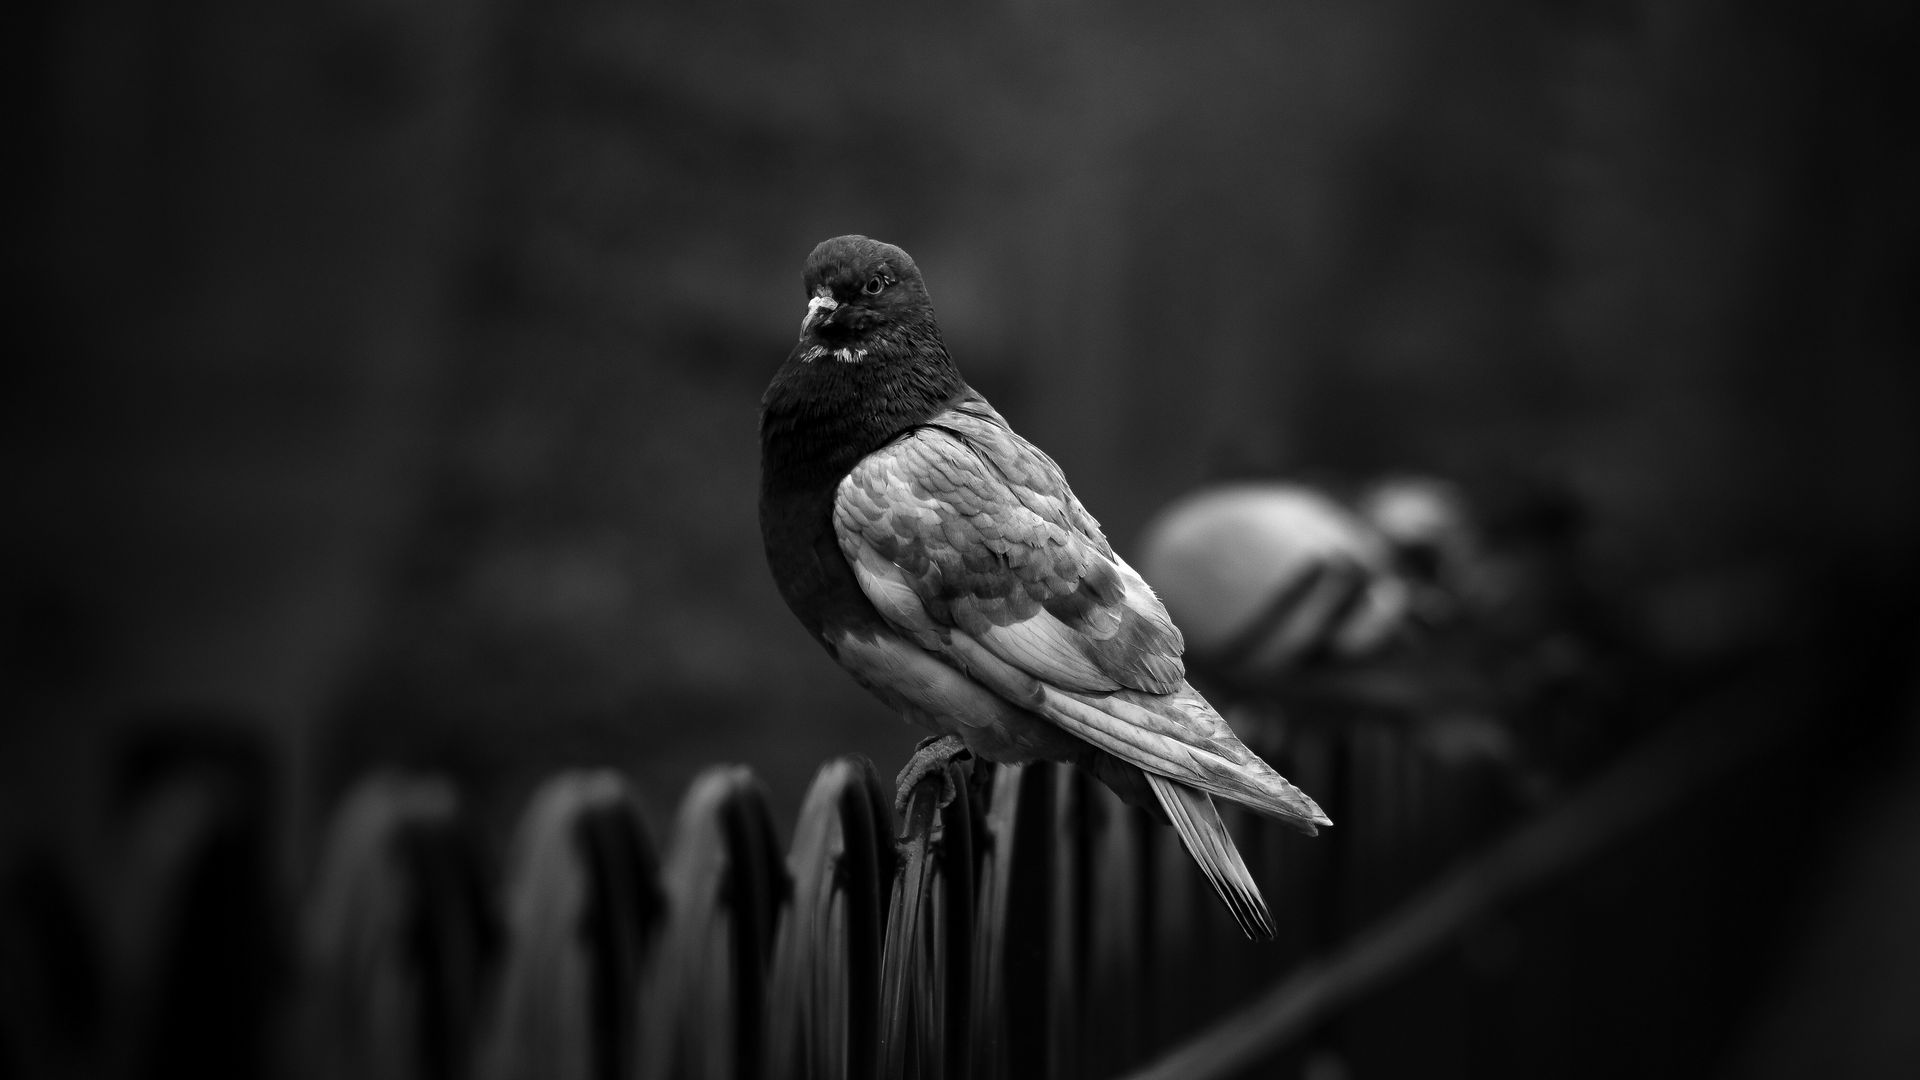 Download wallpaper 1920x1080 dove, pigeon, bw, bird, fence full hd, hdtv,  fhd, 1080p hd background